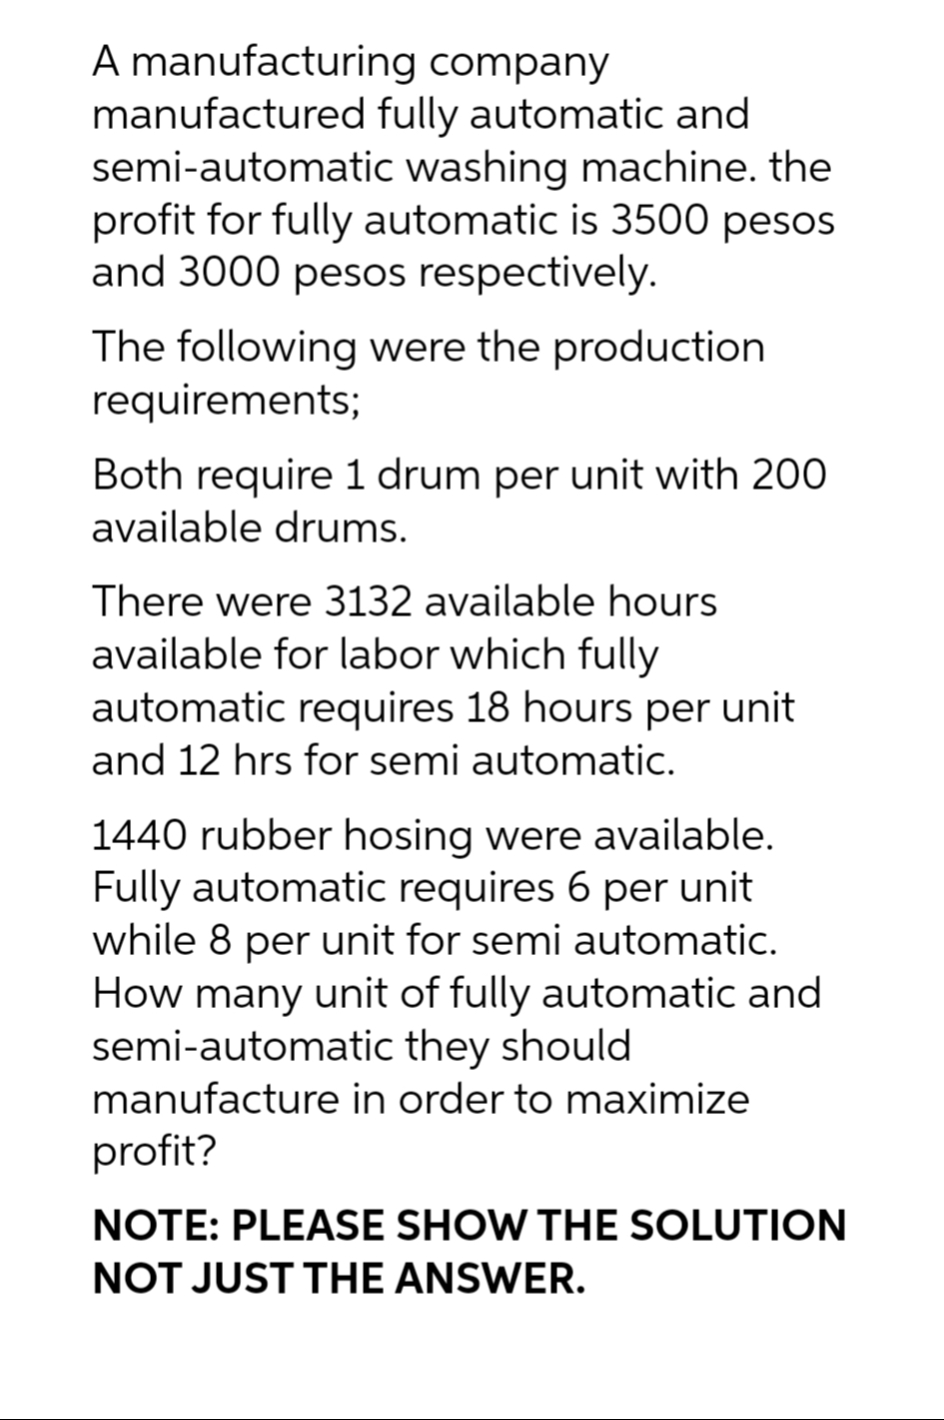 company
A manufacturing
manufactured
semi-automatic
fully automatic and
washing machine. the
profit for fully automatic is 3500 pesos
and 3000 pesos respectively.
The following were the production
requirements;
Both require 1 drum per unit with 200
available drums.
There were 3132 available hours
available for labor which fully
automatic requires 18 hours per unit
and 12 hrs for semi automatic.
1440 rubber hosing were available.
Fully automatic requires 6 per unit
while 8 per unit for semi automatic.
How many unit of fully automatic and
semi-automatic they should
manufacture in order to maximize
profit?
NOTE: PLEASE SHOW THE SOLUTION
NOT JUST THE ANSWER.